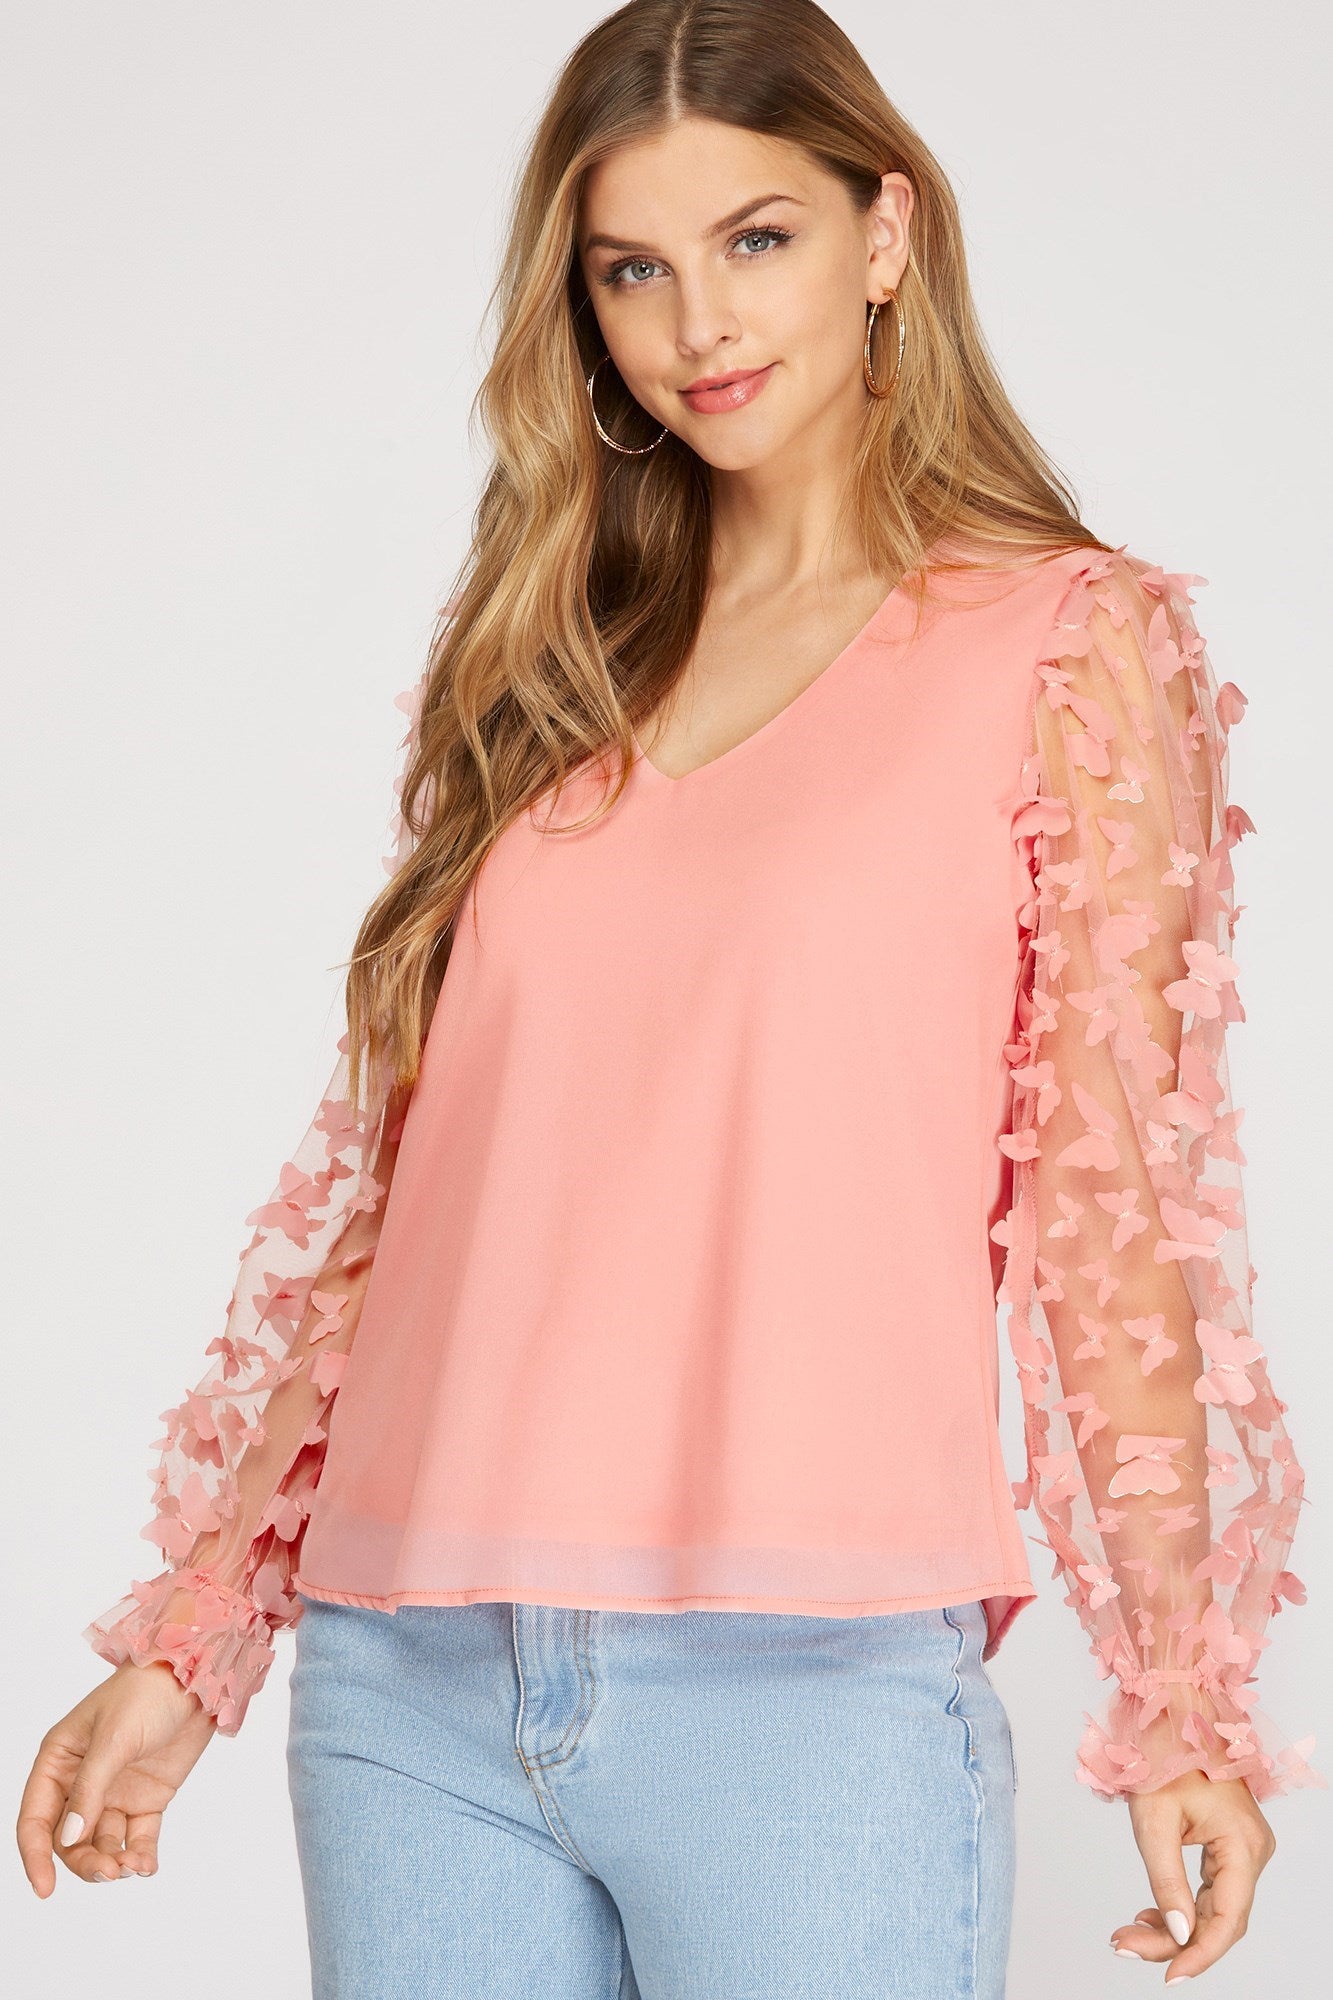 PINK 3D BUTTERFLY APPLIQUE MESH CONTRAST SLEEVE WOVEN TOP